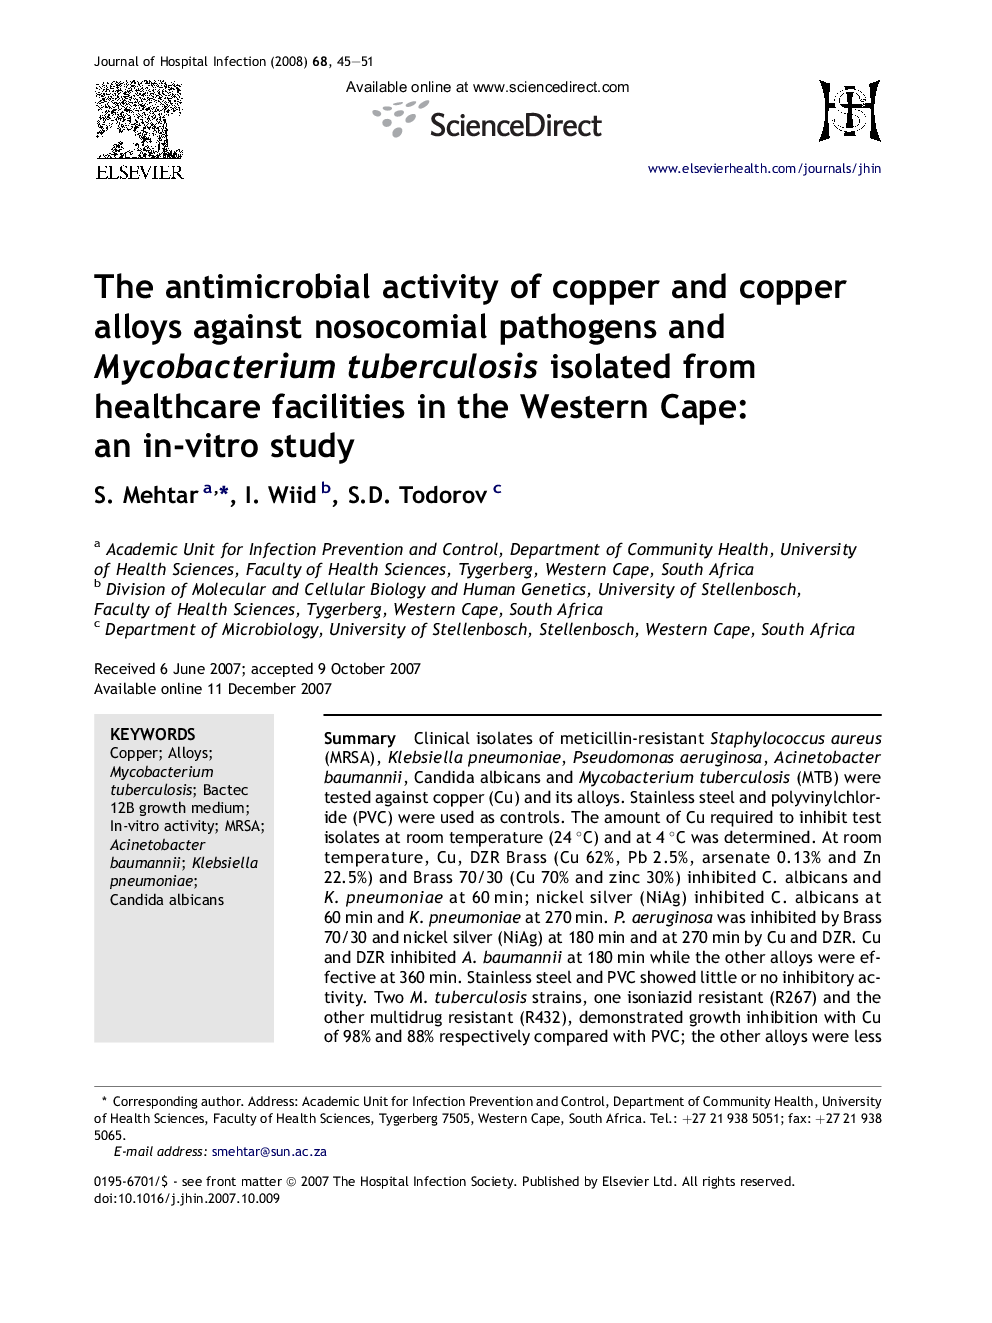 The antimicrobial activity of copper and copper alloys against nosocomial pathogens and Mycobacterium tuberculosis isolated from healthcare facilities in the Western Cape: an in-vitro study